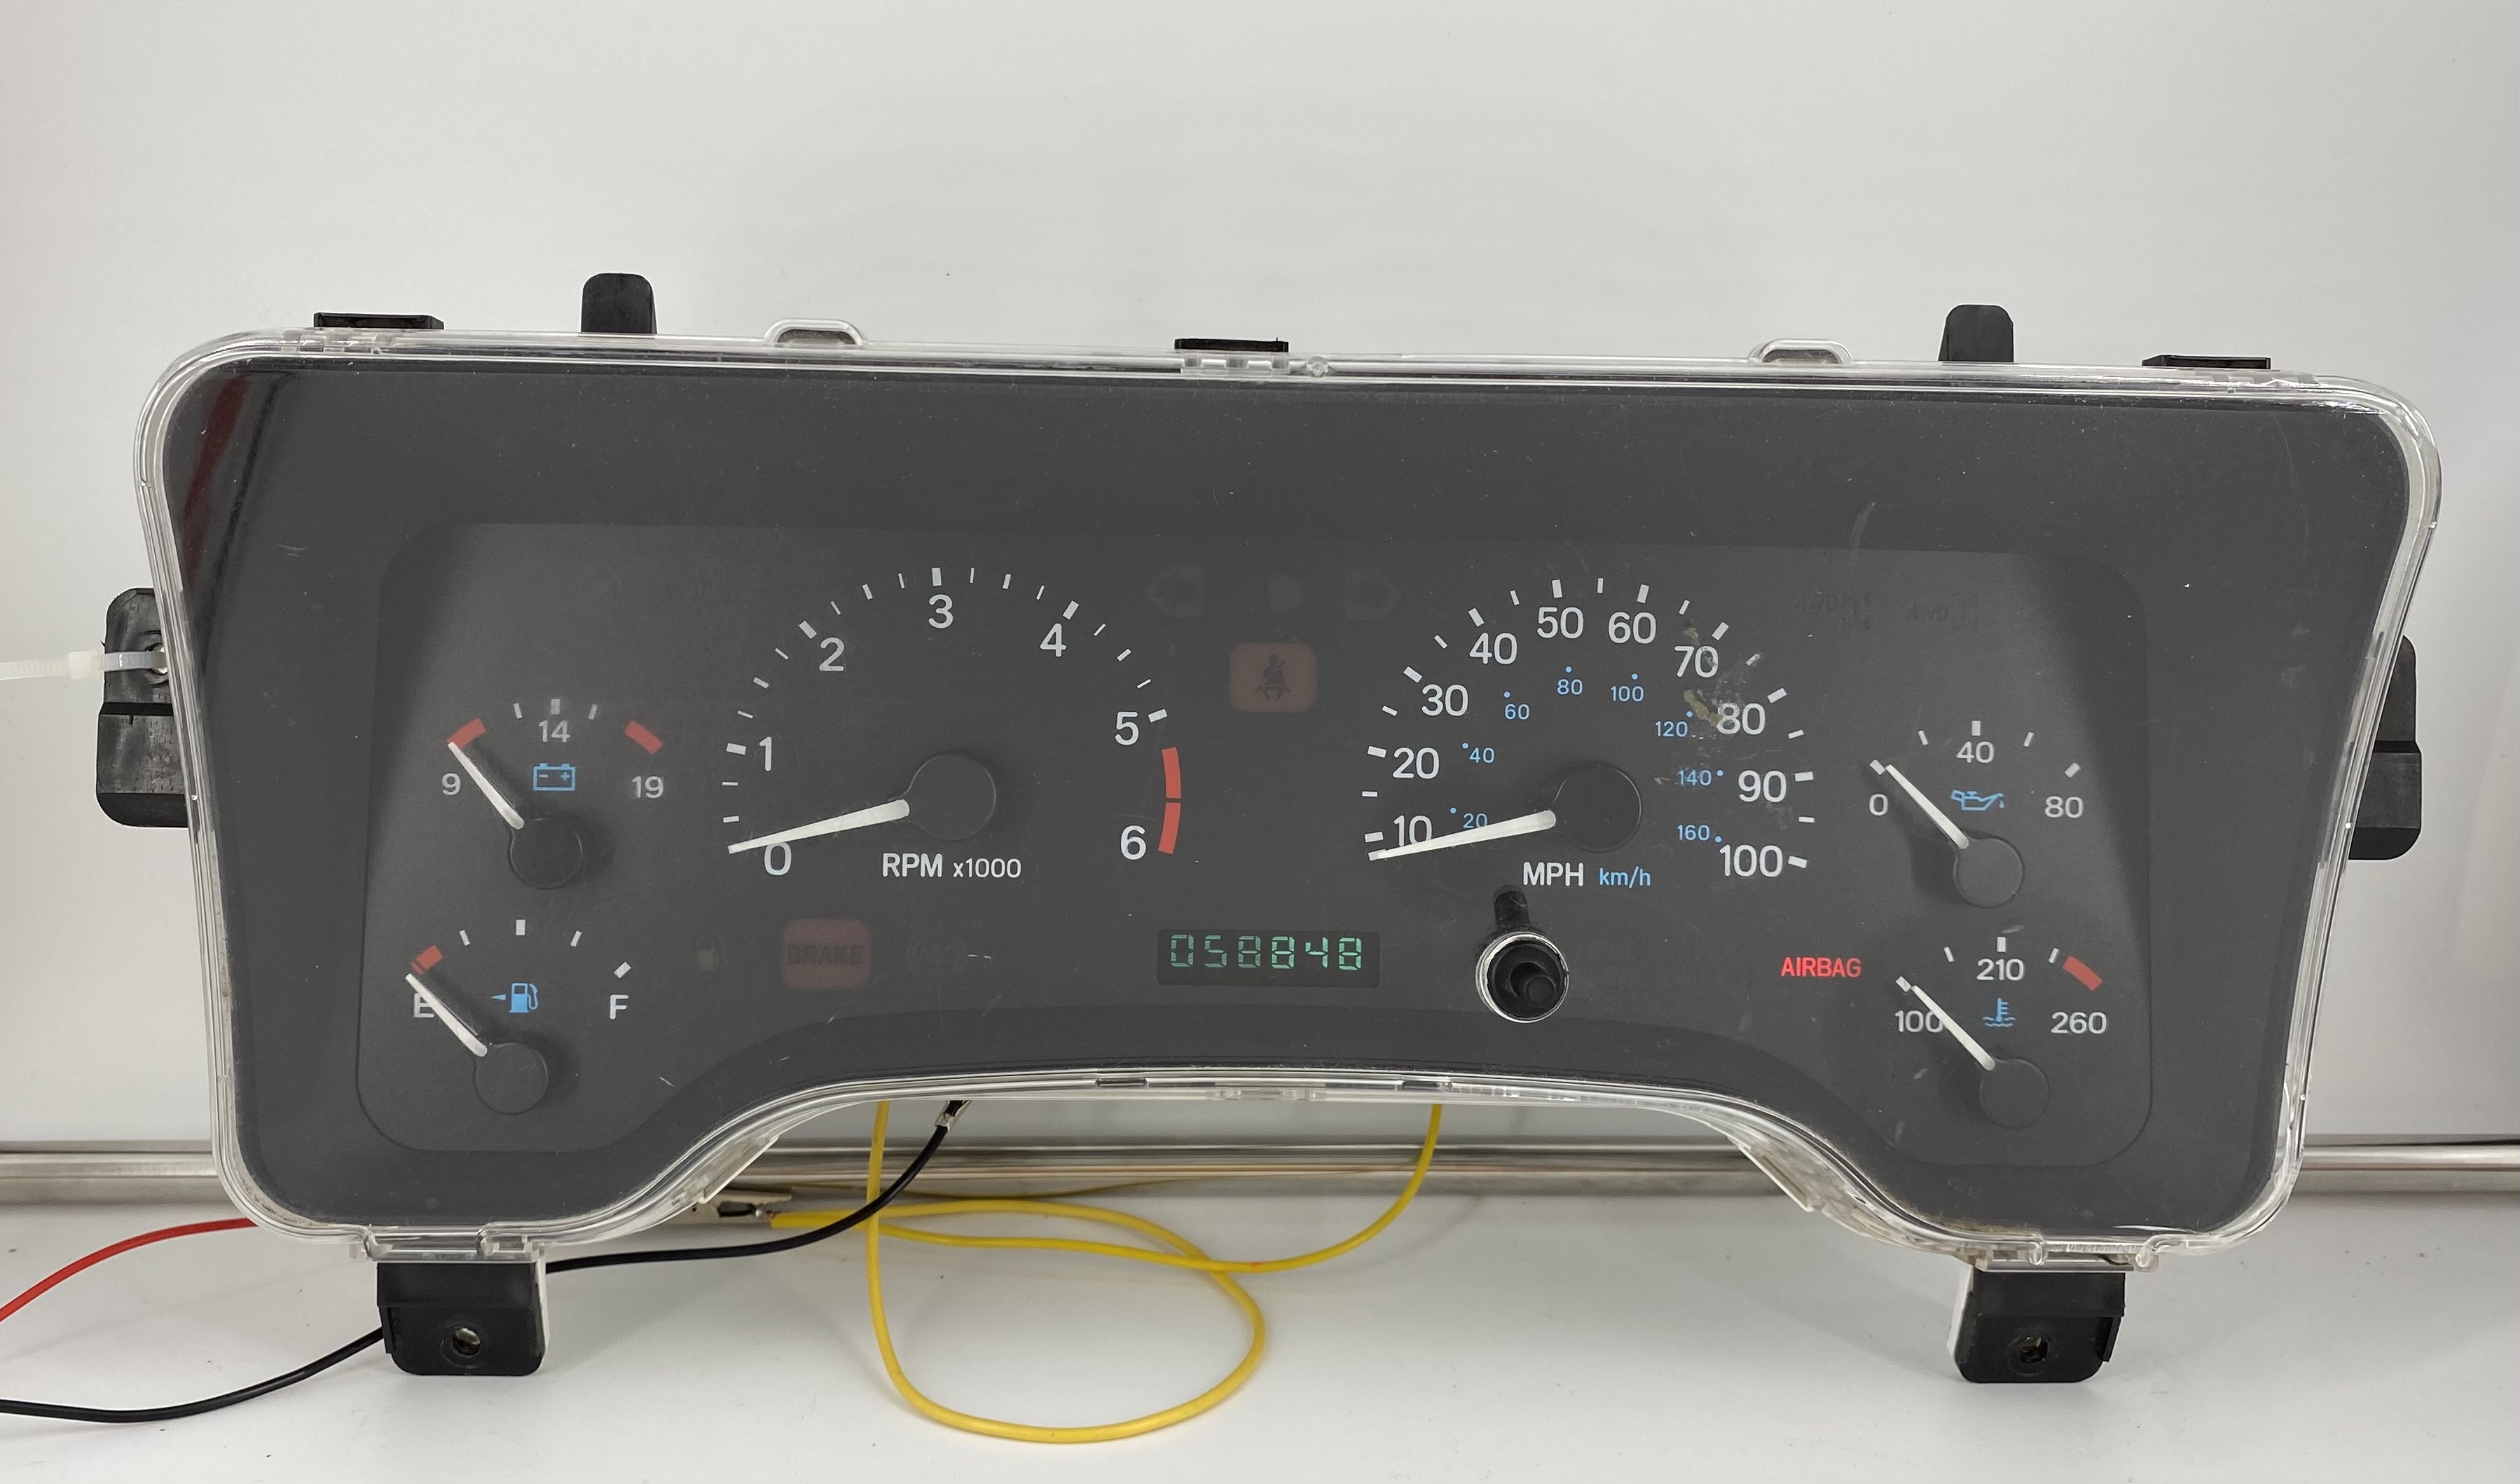 1999 JEEP WRANGLER USED DASHBOARD INSTRUMENT CLUSTER FOR SALE (MPH) - DASHBOARD  INSTRUMENT CLUSTER